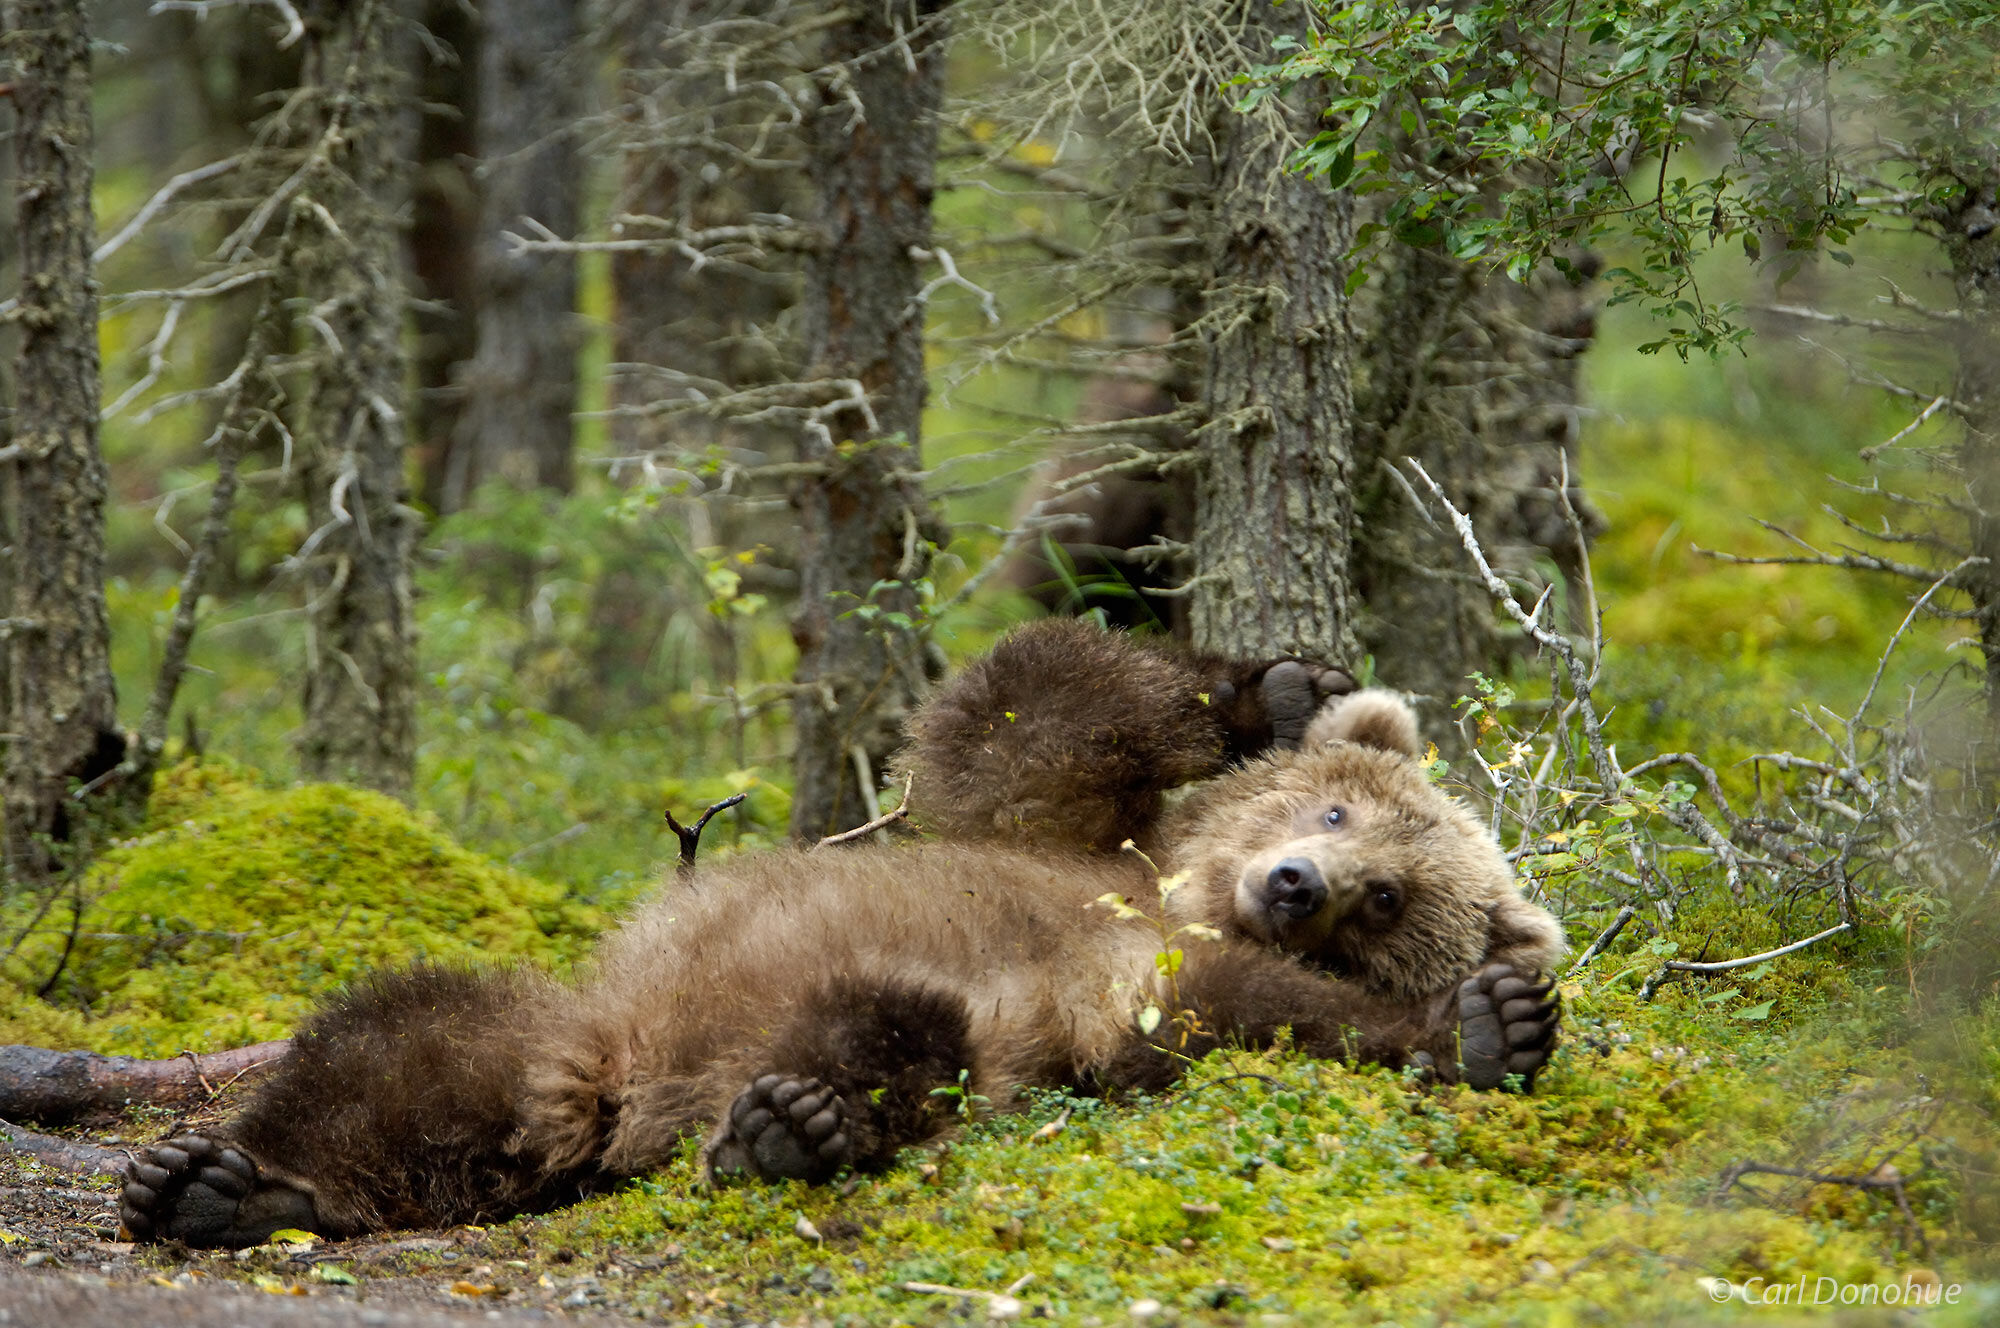 Grizzly Bear cub, stretching on a bed of moss in a spruce forest, Katmai National Park, Alaska, Ursus arctos.